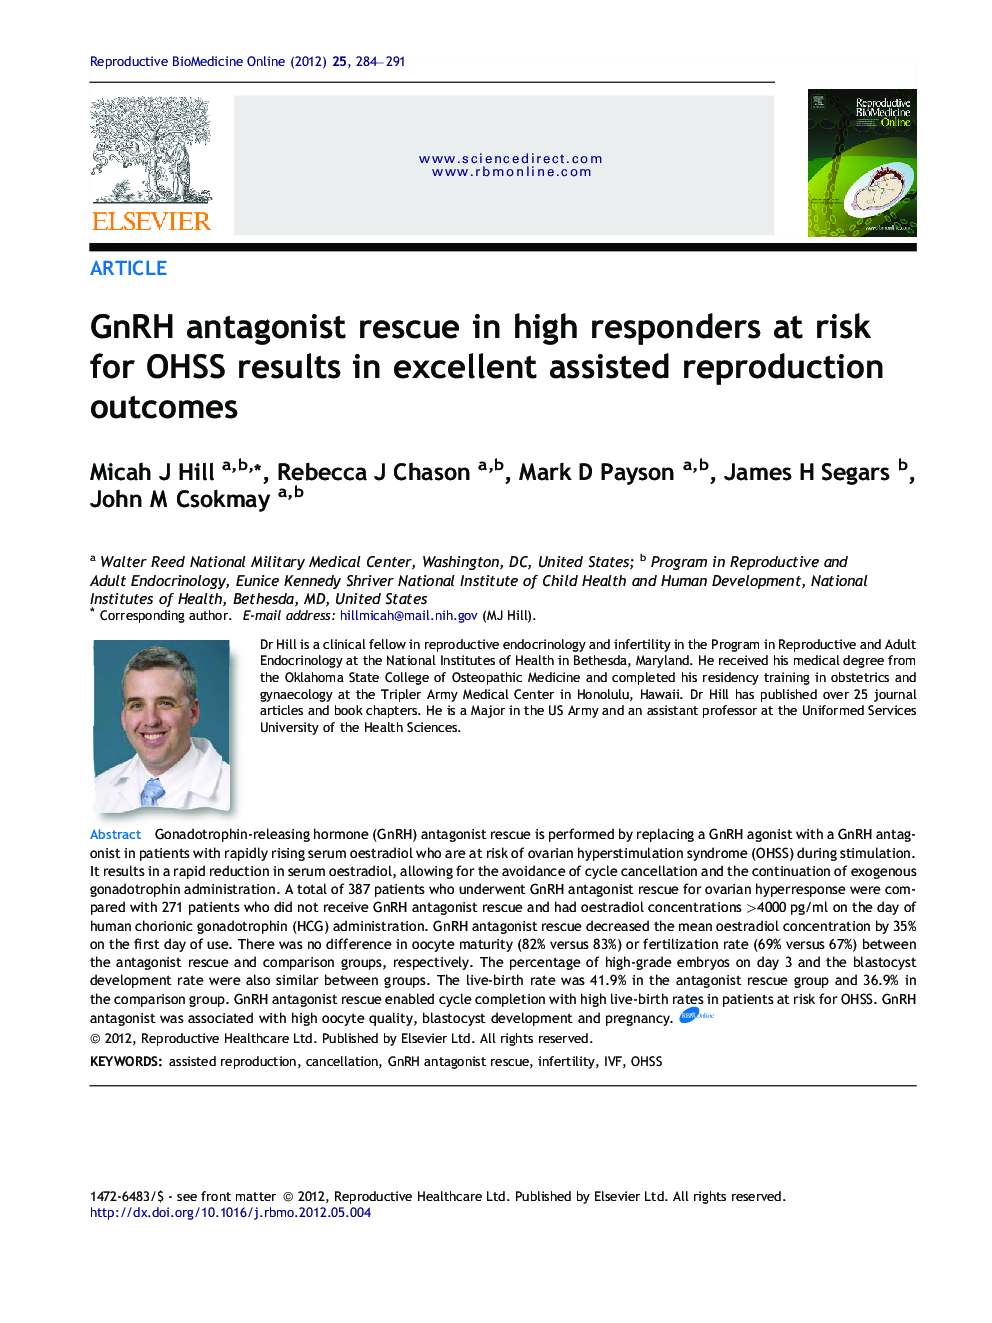 GnRH antagonist rescue in high responders at risk for OHSS results in excellent assisted reproduction outcomes 